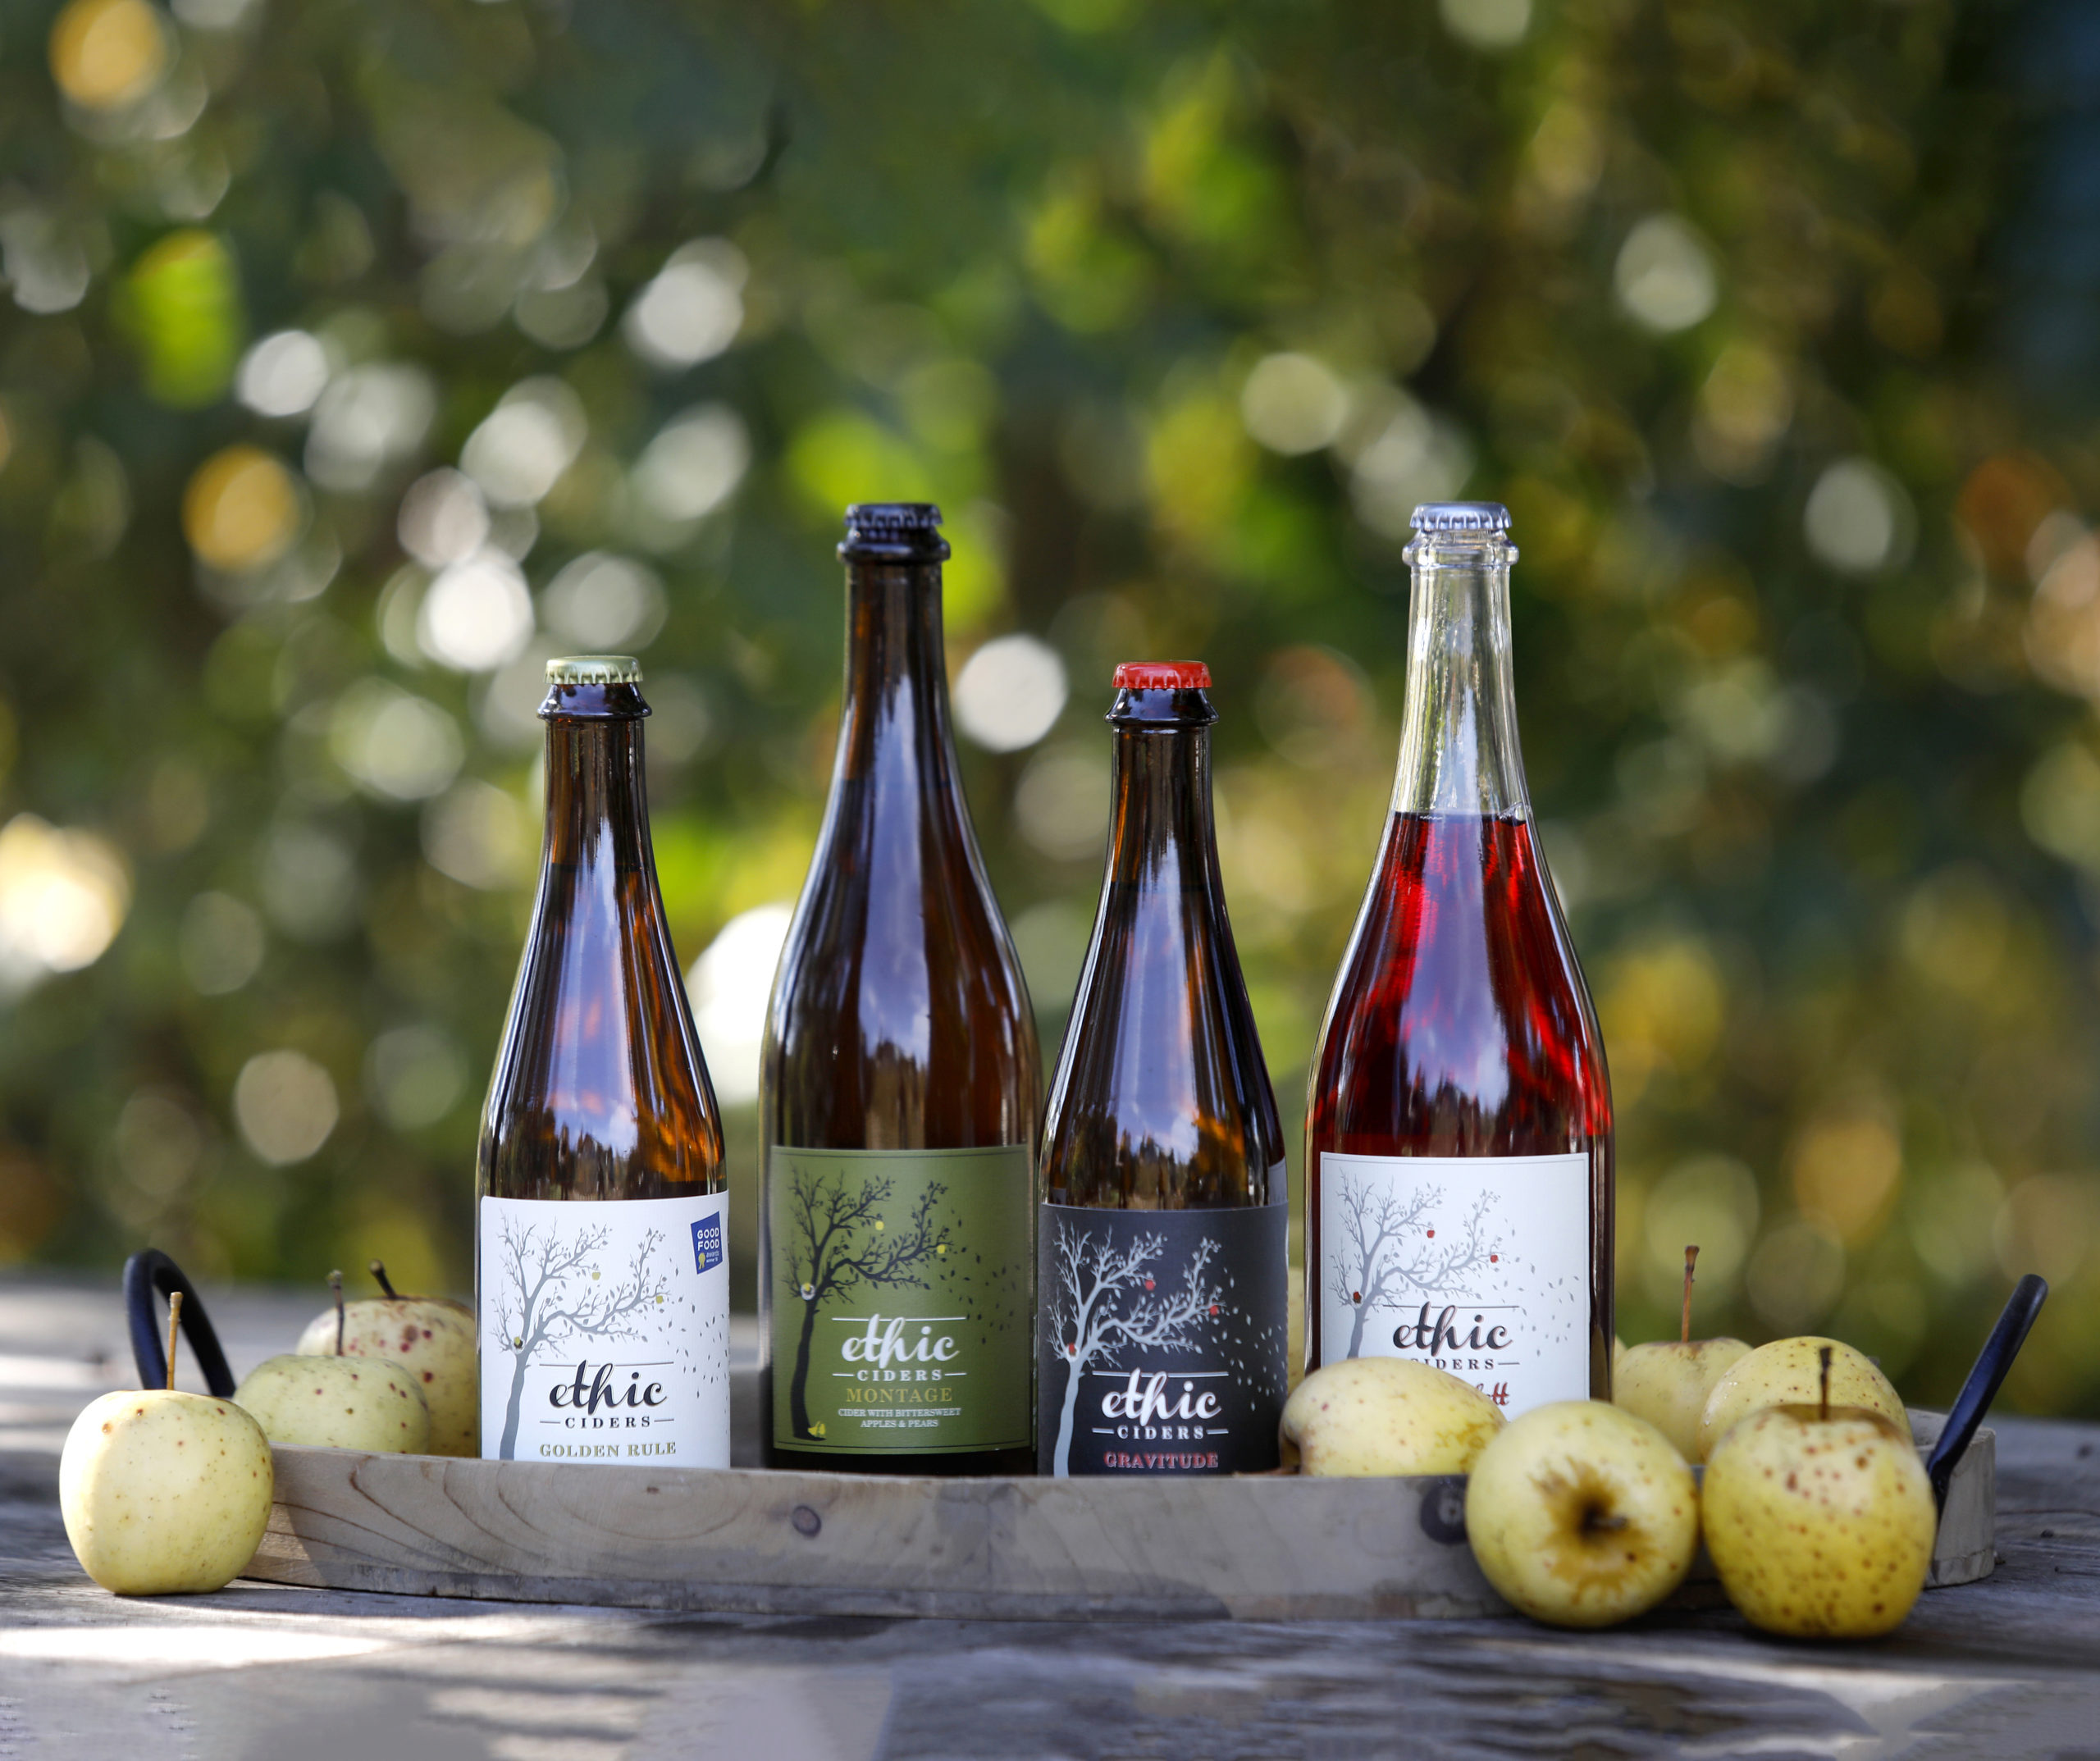 A variety of apple ciders produced by Ethic Ciders include Golden Rule, Montage, Gravitude, and Scarlett. (Beth Schlanker/The Press Democrat)